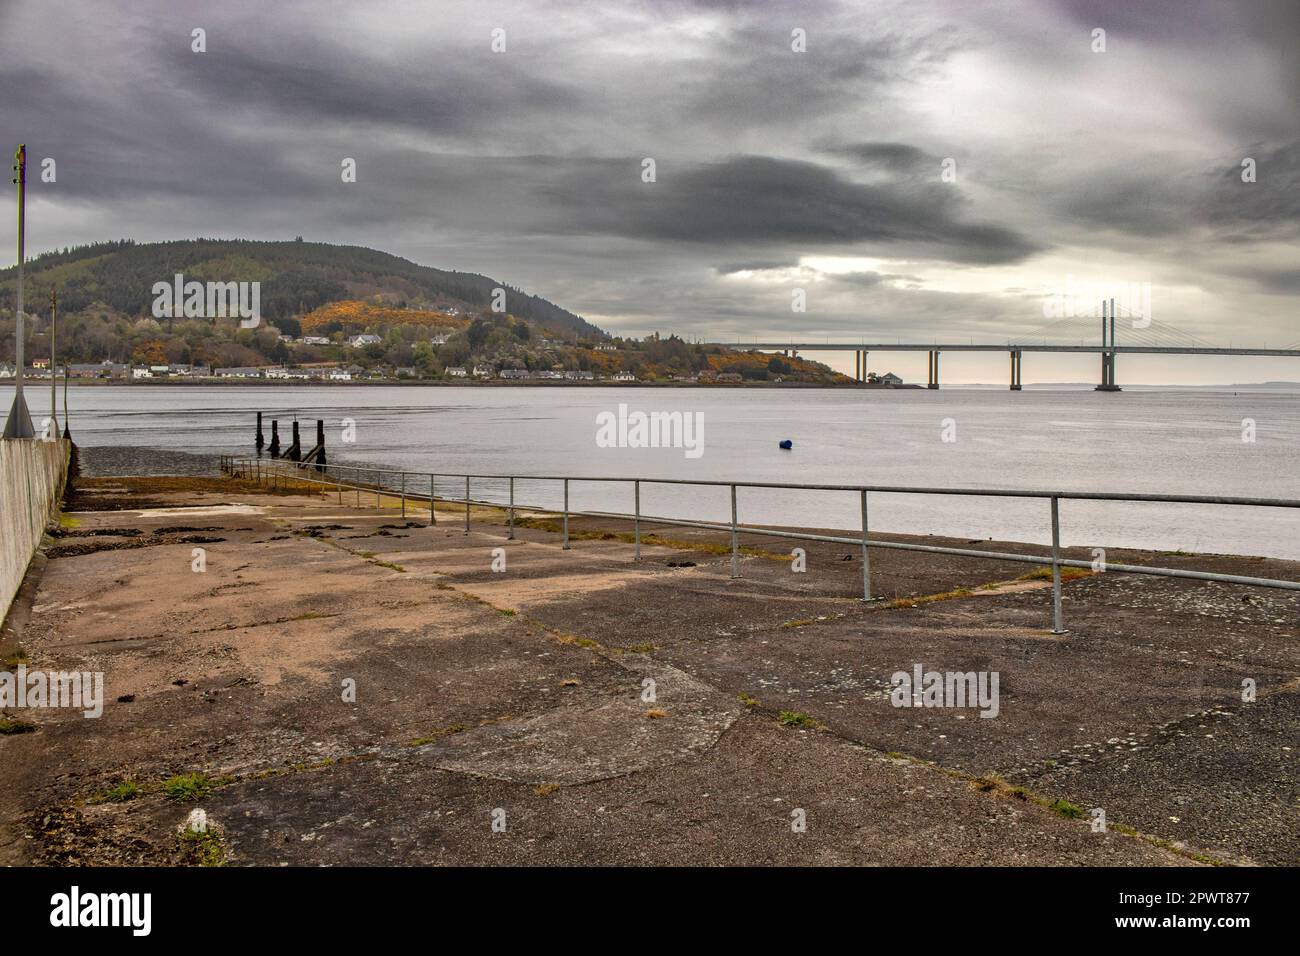 Inverness Scotland the Kessock Bridge and the old ferry slipway on the Beauly Firth Stock Photo